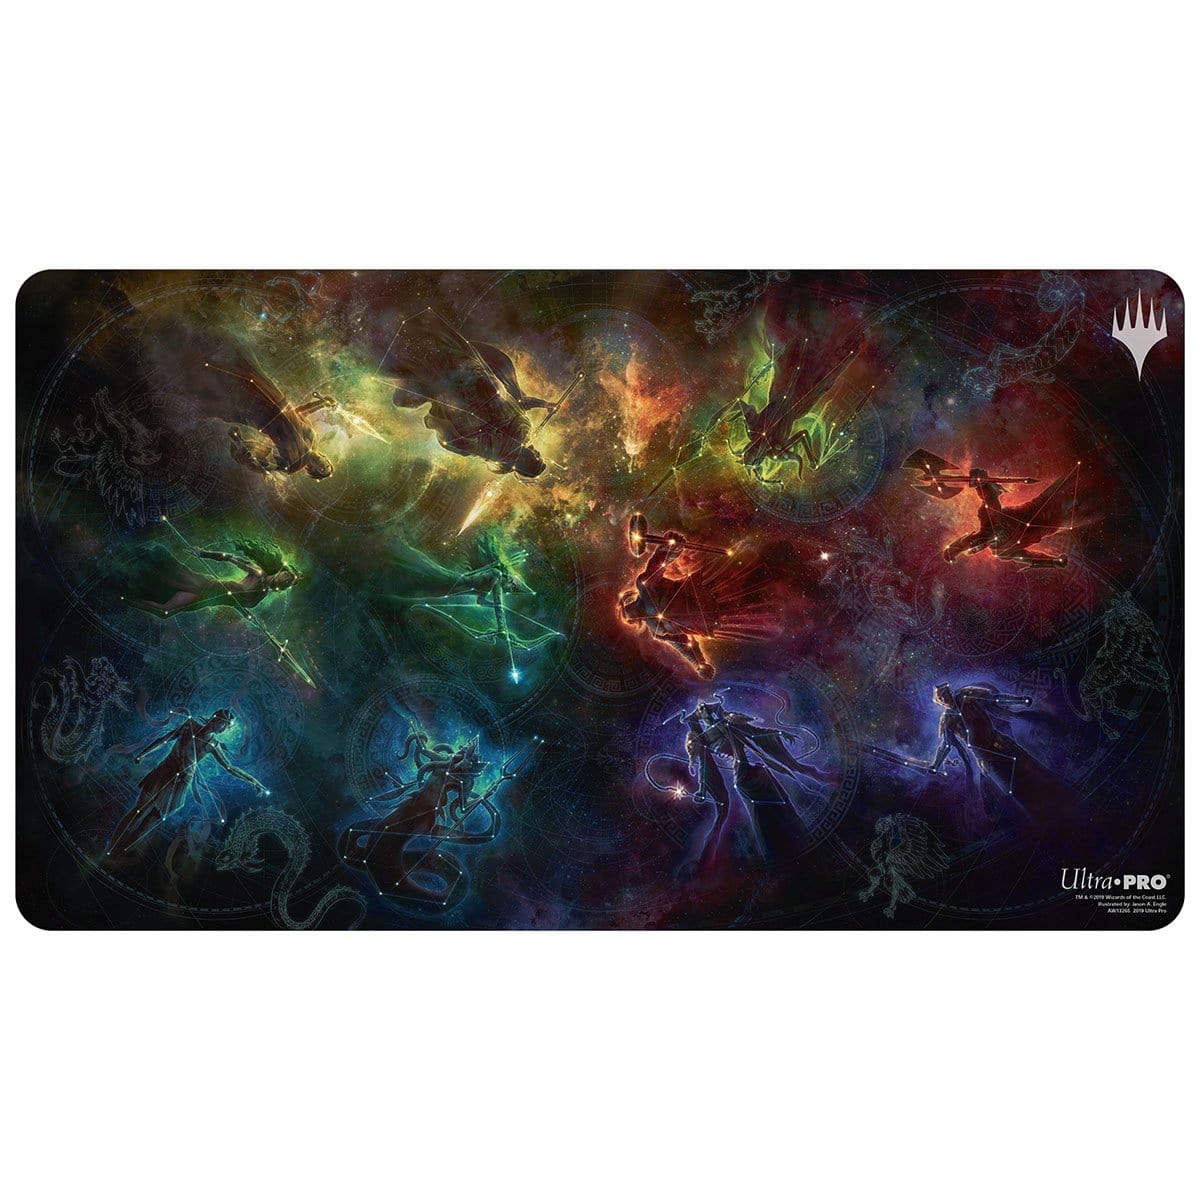 Theros Beyond Death Gods &amp; Demigods Playmat - Playmat - Original Magic Art - Accessories for Magic the Gathering and other card games